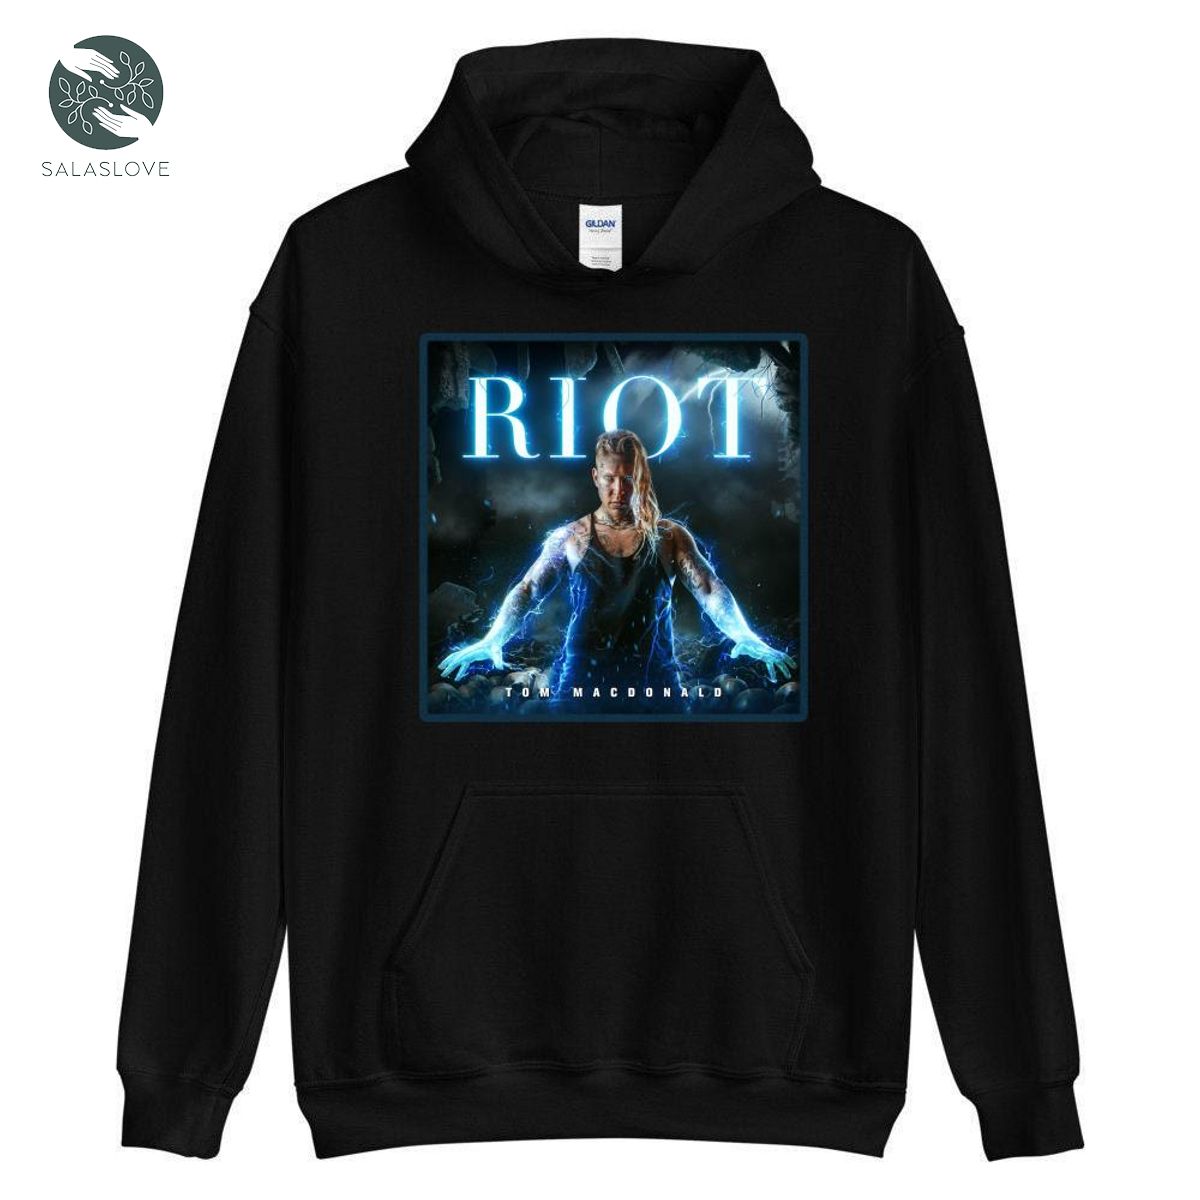 Riot by Tom MacDonald New Song Hoodie